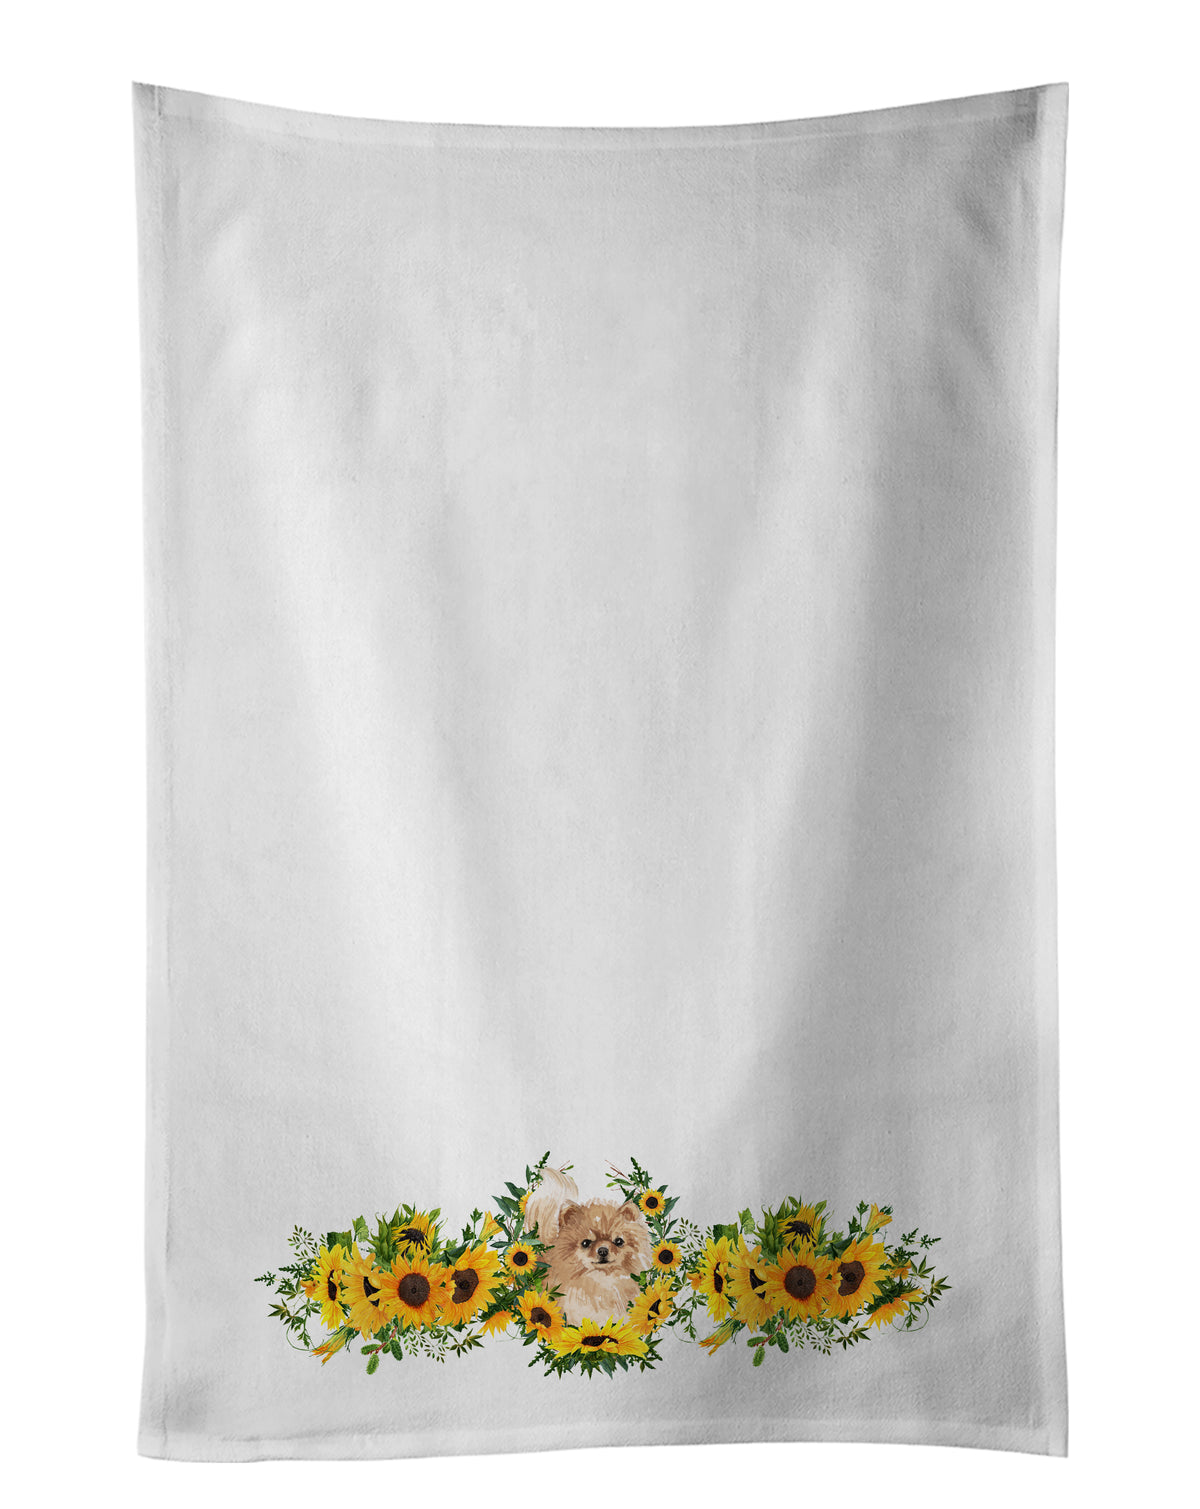 Buy this Pomeranian in Sunflowers White Kitchen Towel Set of 2